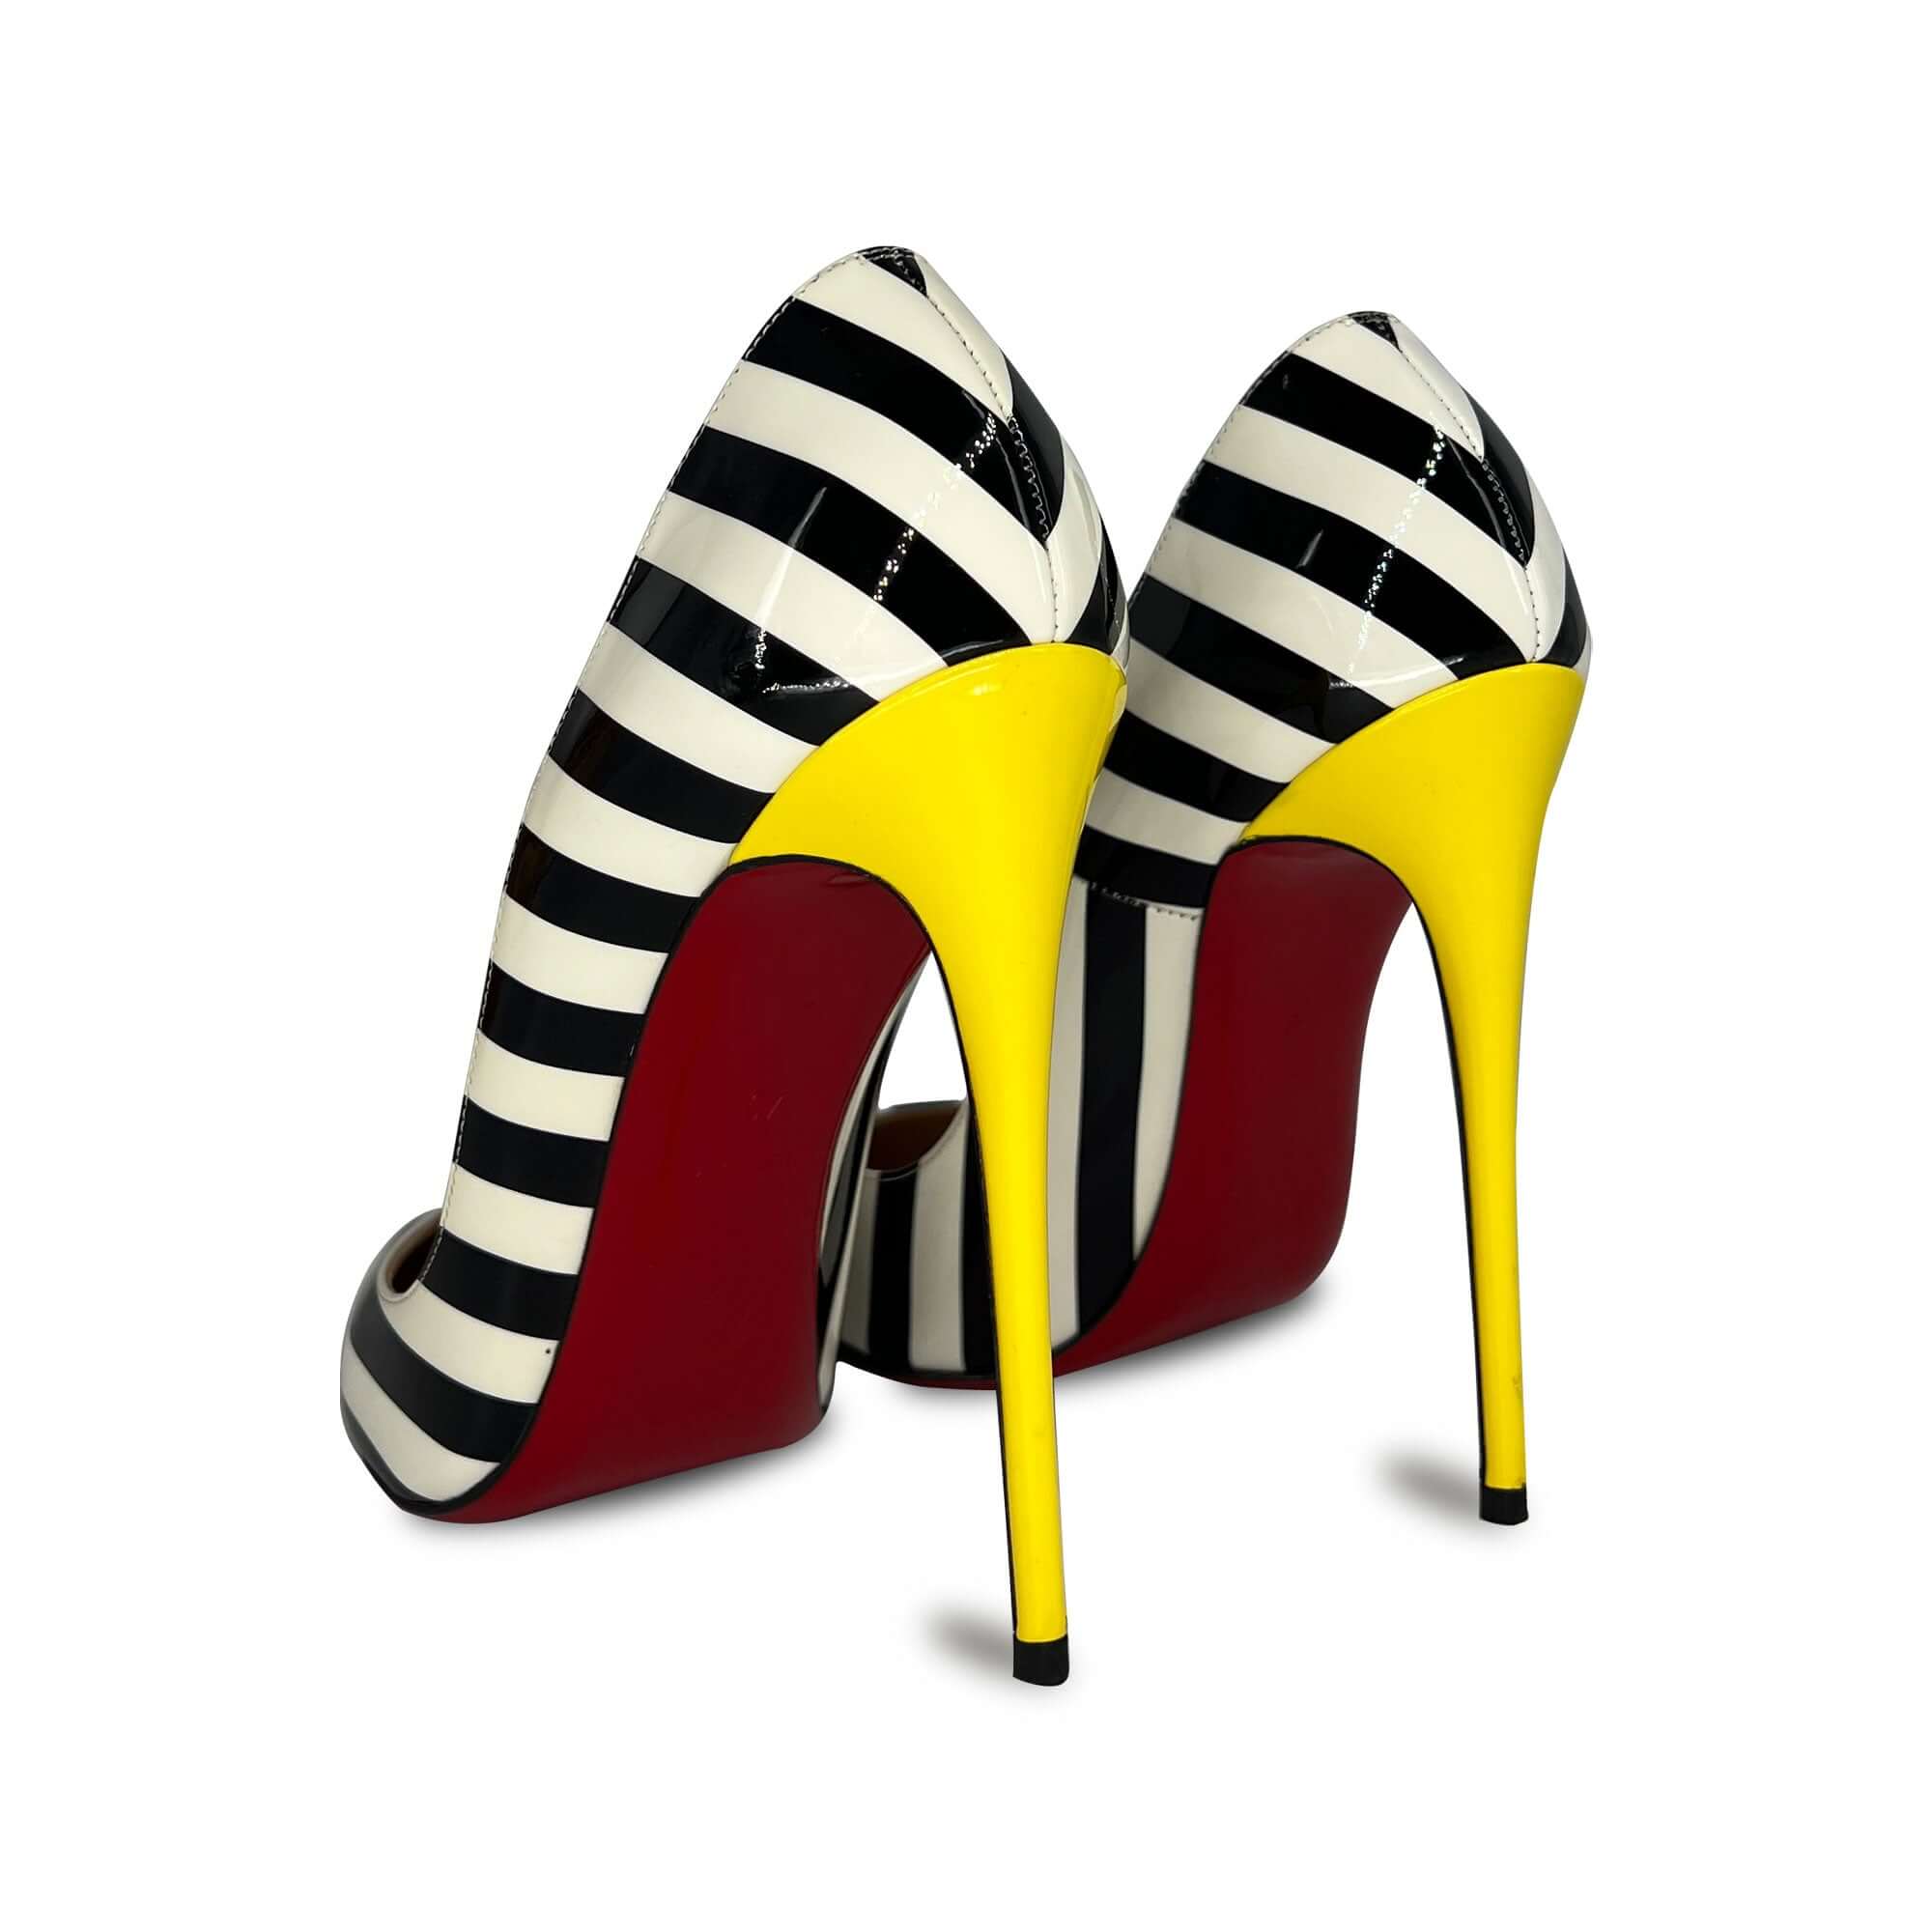 Christian Louboutin 'So Kate' 120mm stripped patent leather pumps –  VintageBooBoo Pre owned designer bags, shoes, clothes